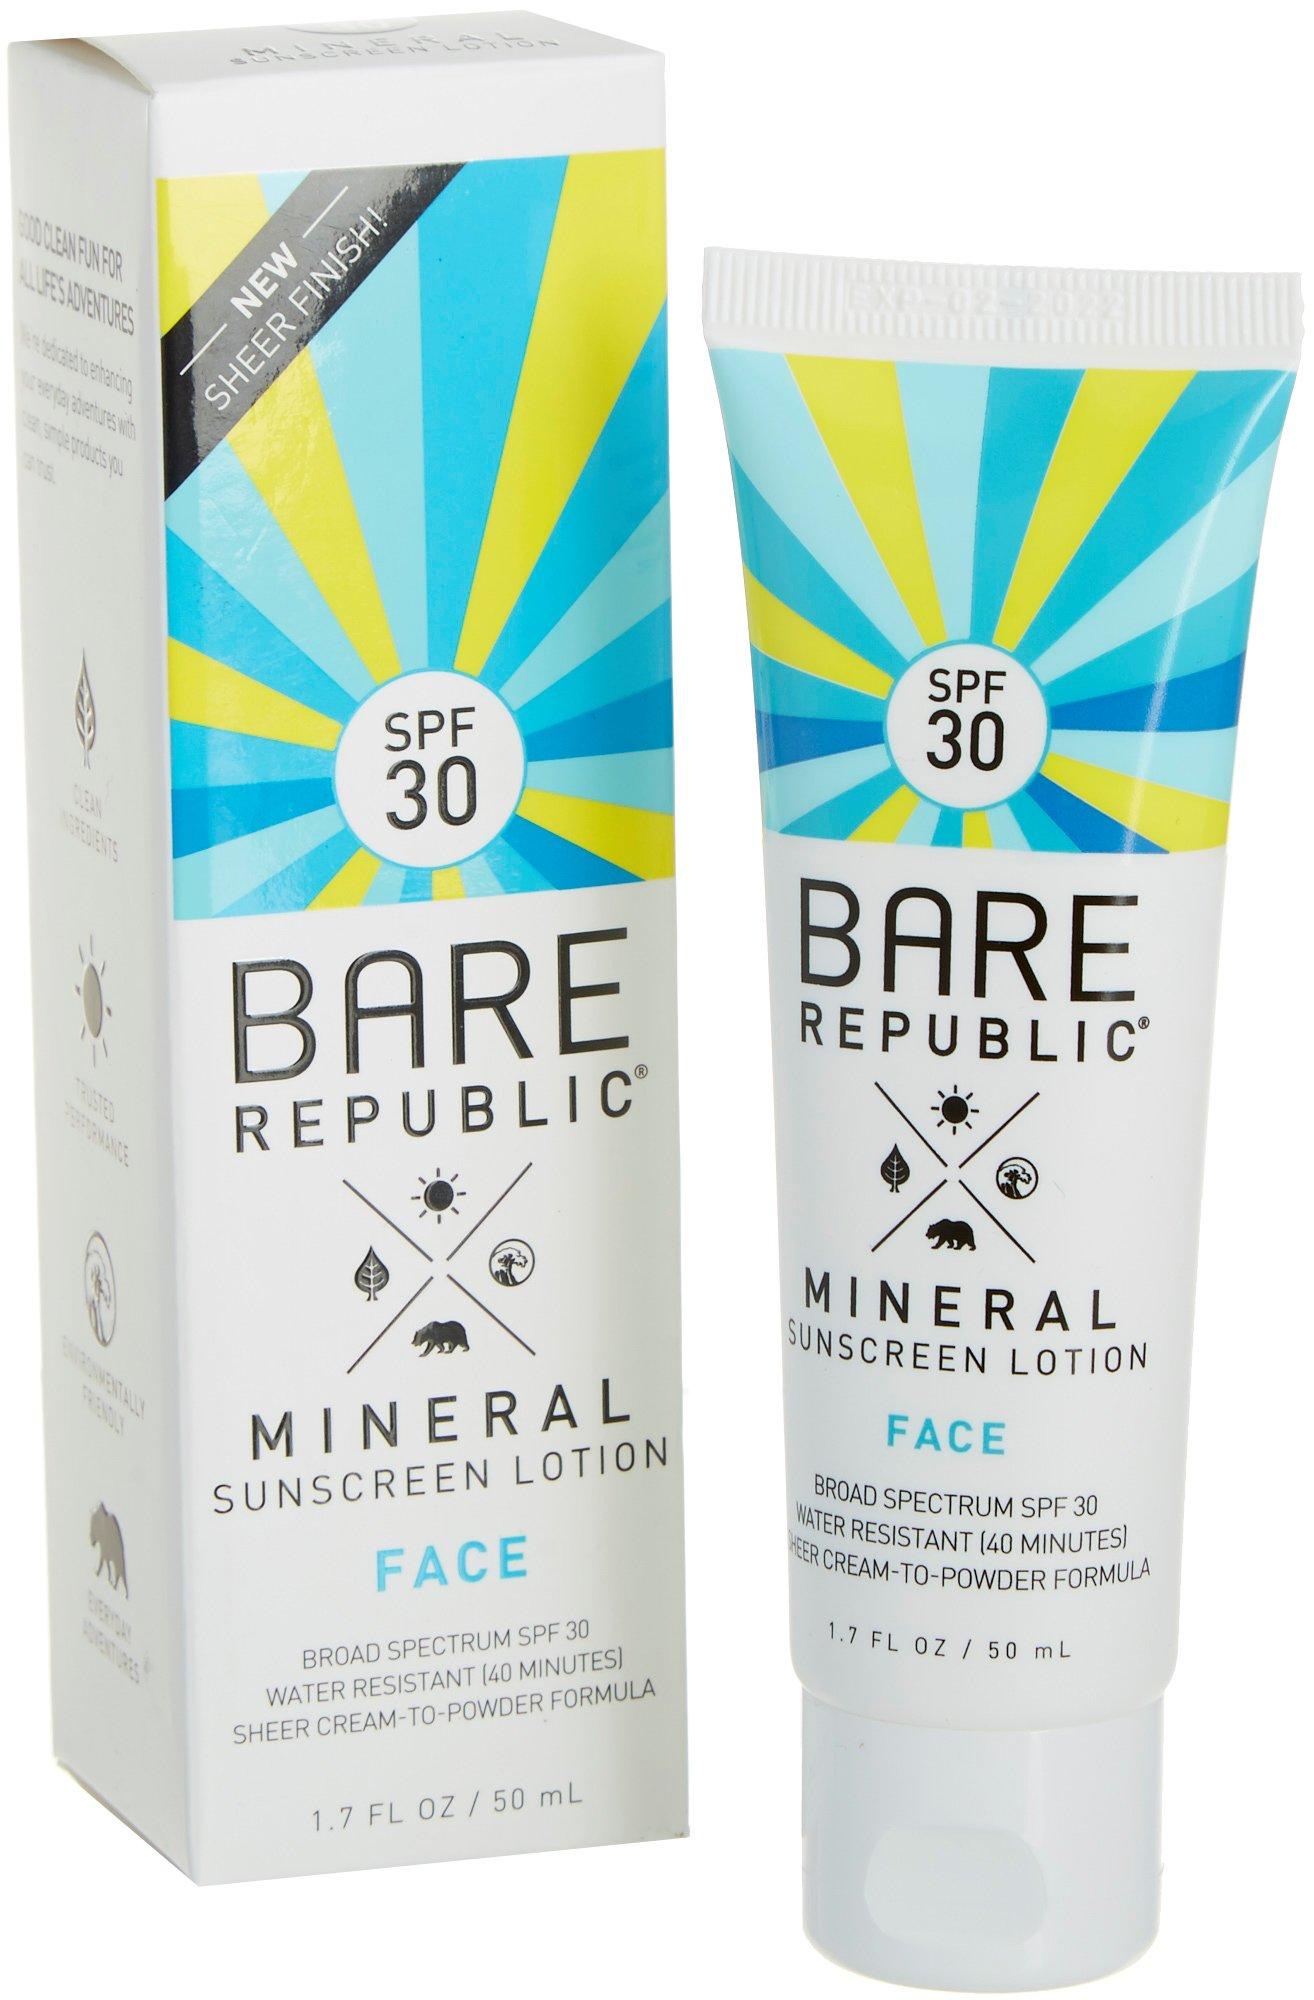 SPF 30 Mineral Face Sunscreen Lotion 1.7 fl.oz